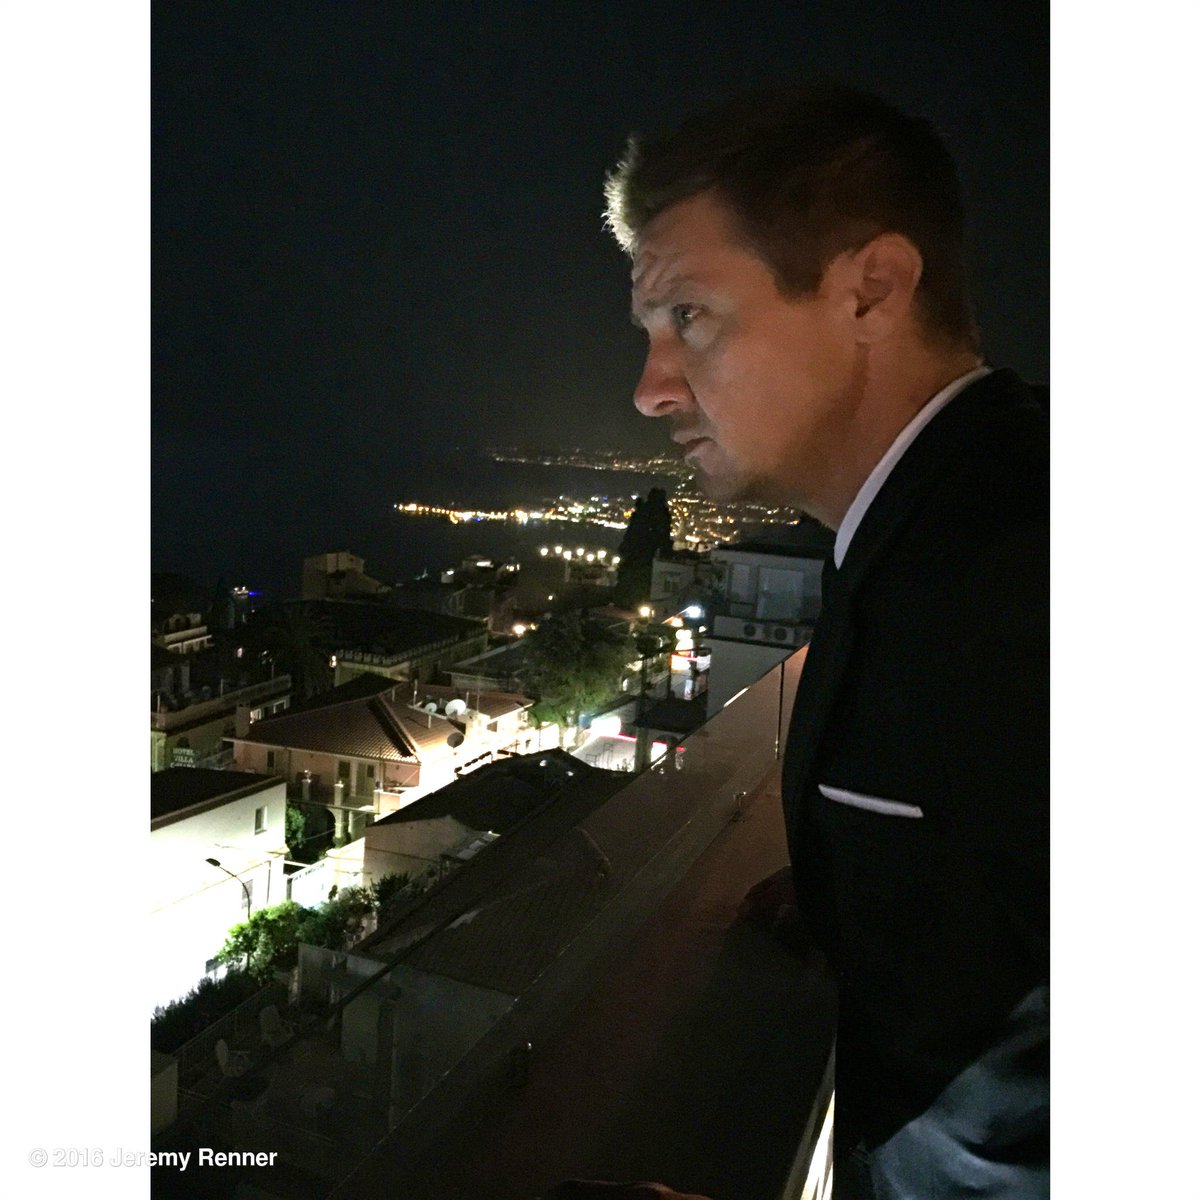 Vistas of this city over a great dinner with new friends ! #taormina #sicily #goodday https://t.co/nzonJcYBIA